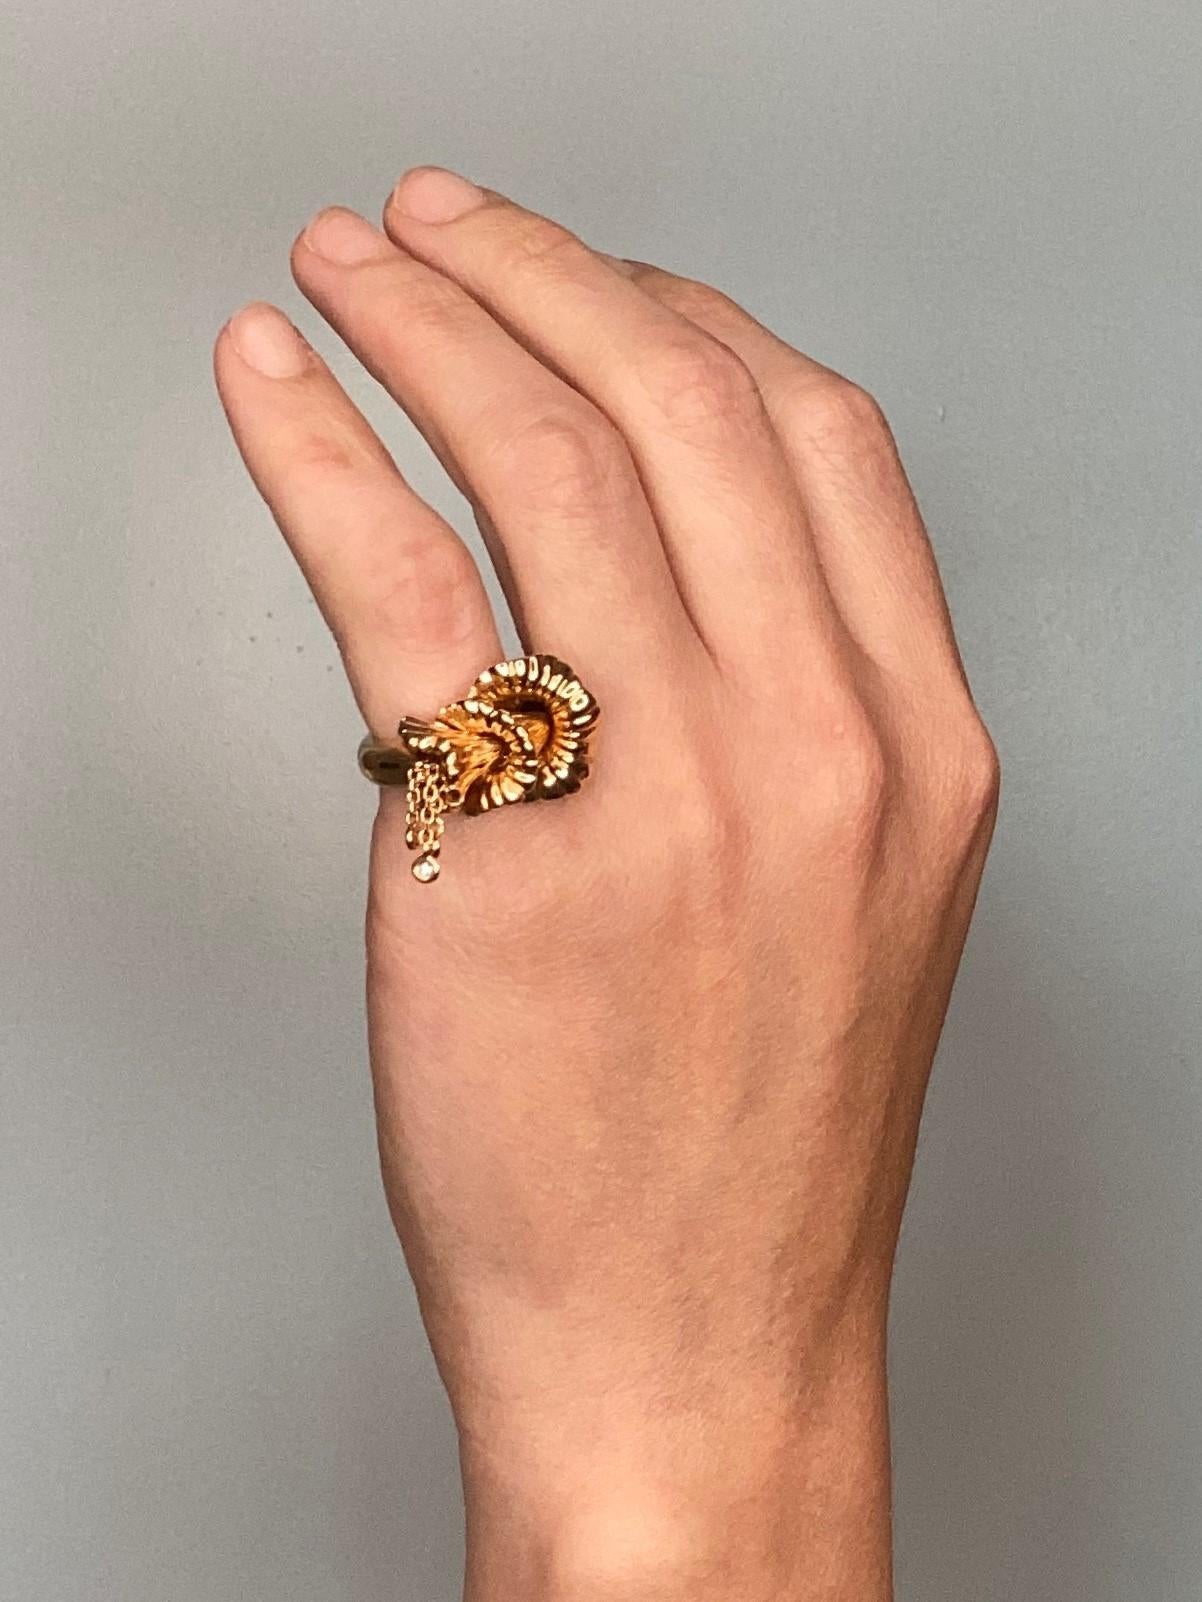 Exquises confidences Ring designed by Boucheron.

A modern and ultimate piece, created in Paris, France by the jewelry house of Boucheron. This wonderful and rare sculptural ring is part of the Exquises confidences (Exquisite confidences) collection